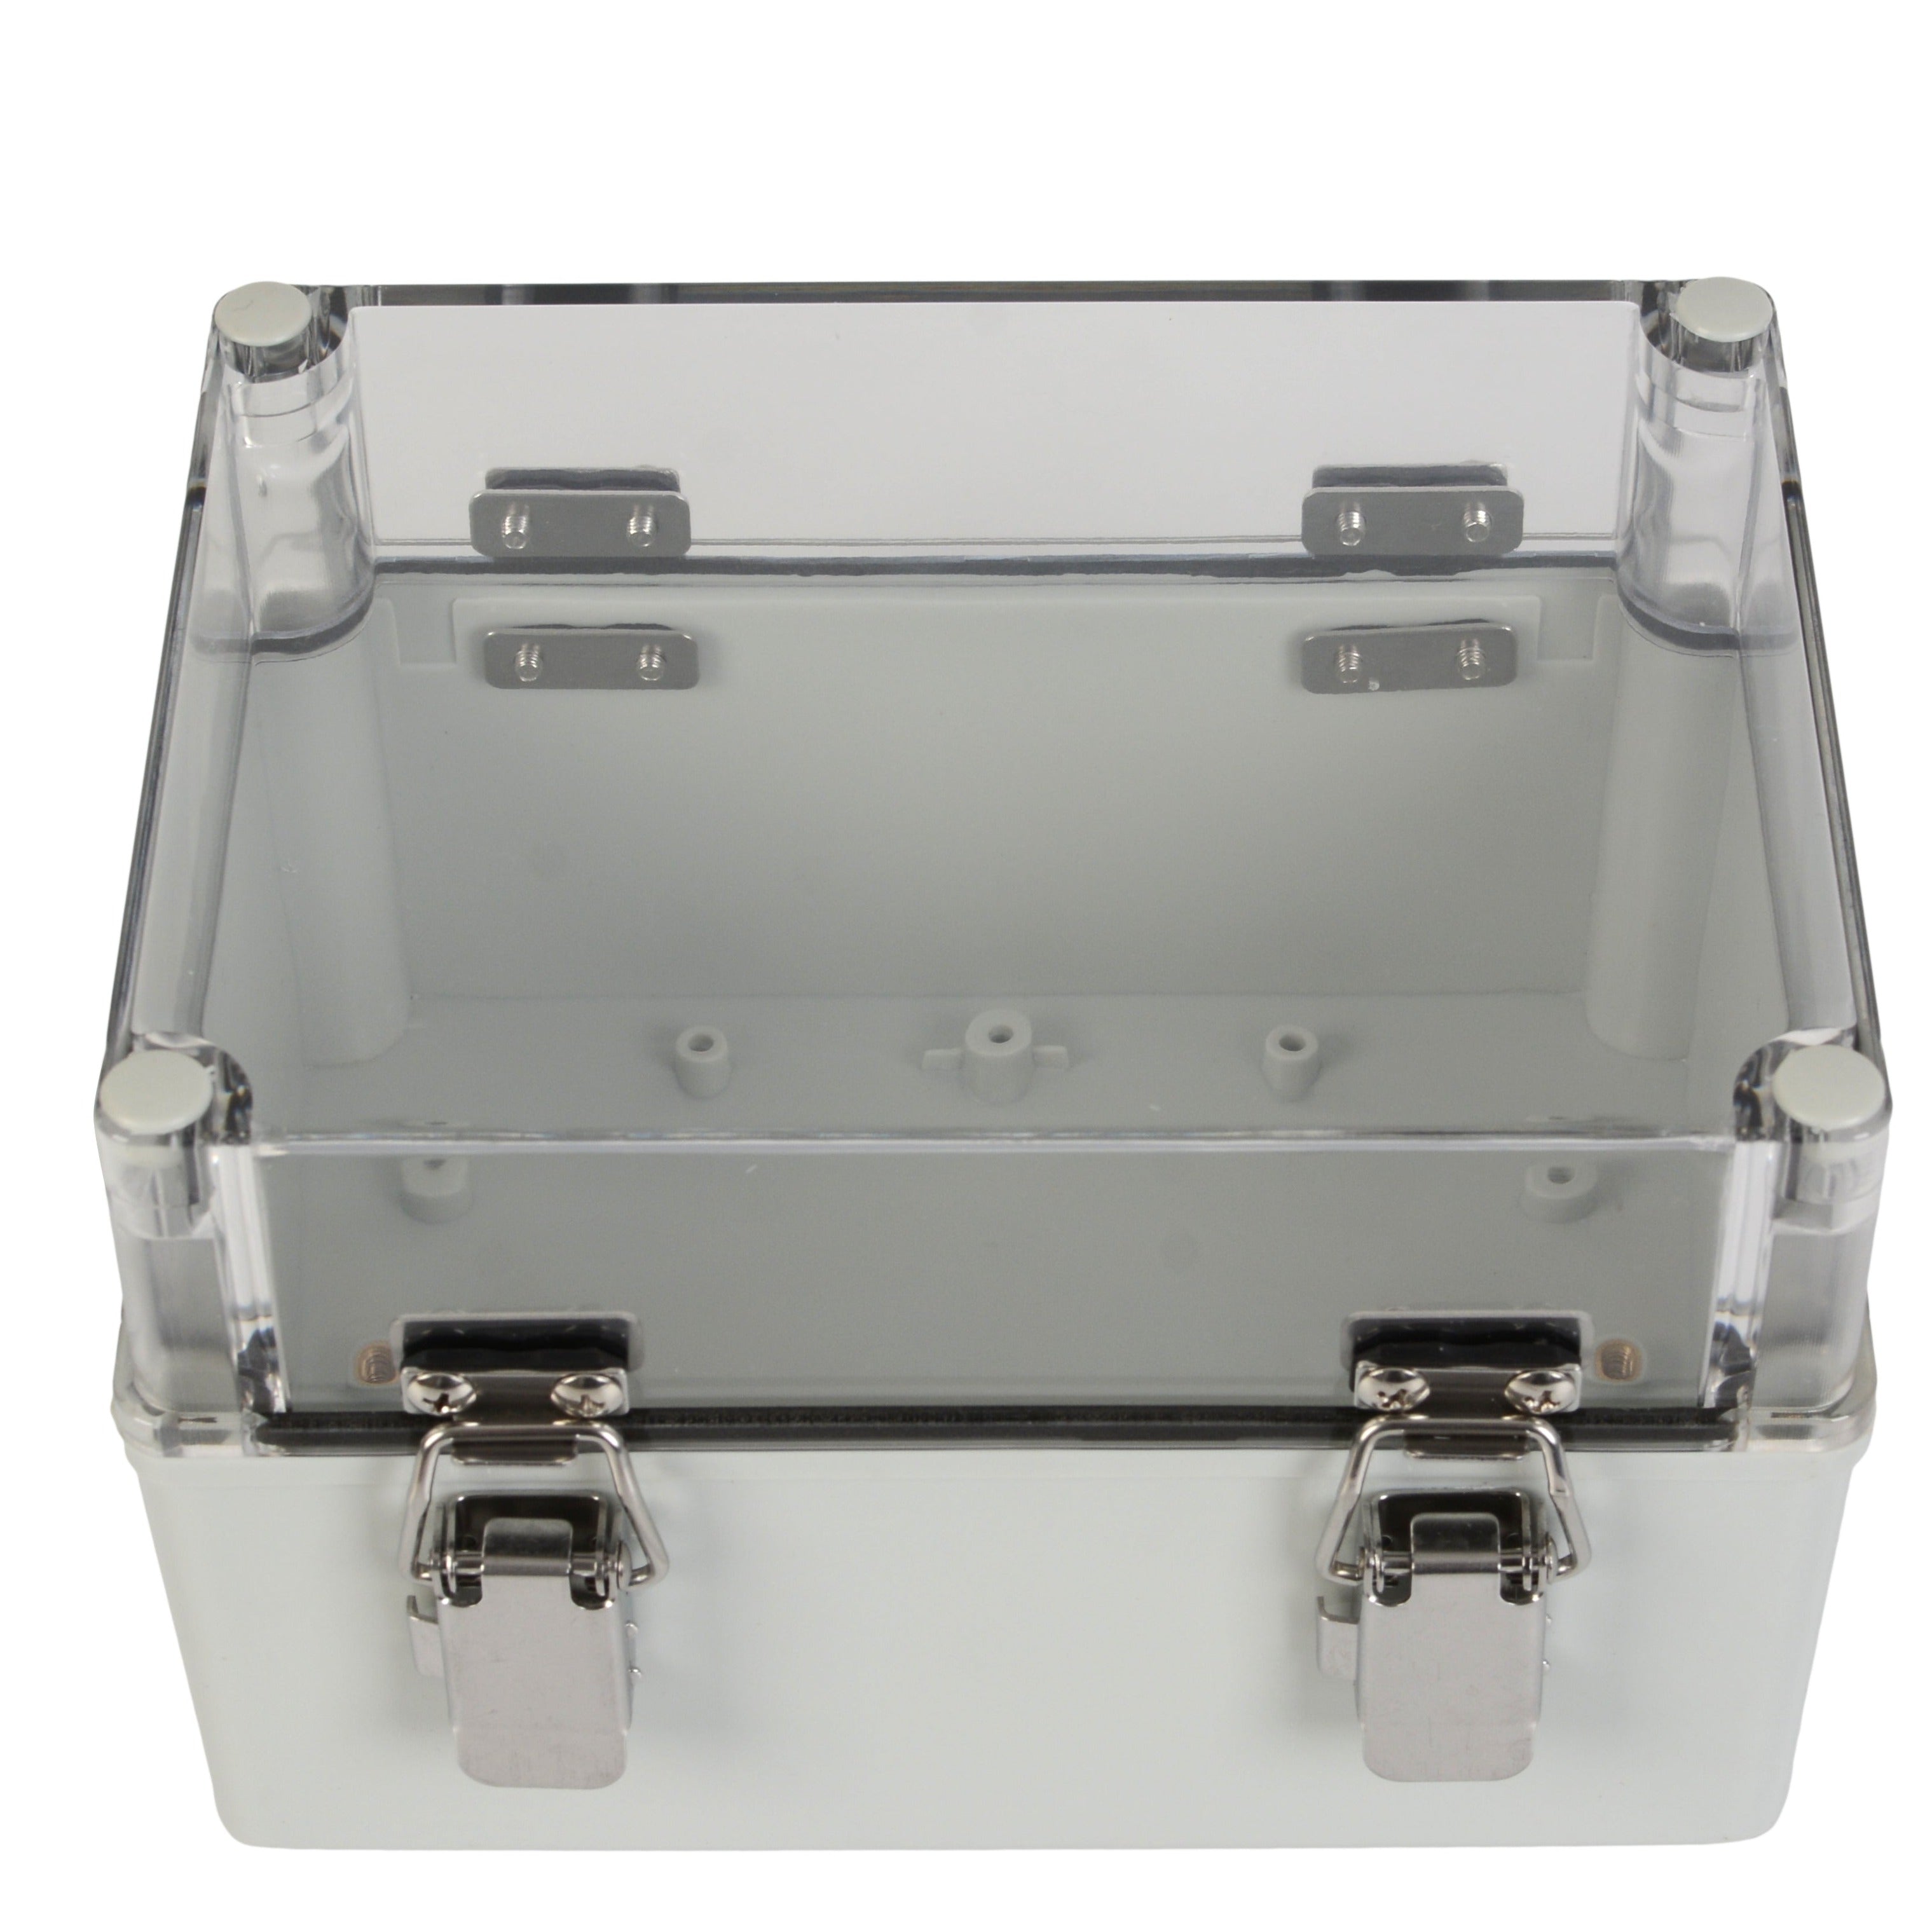 ABS IP66 Clear Lid Junction Box 150 x 200 x 130mm